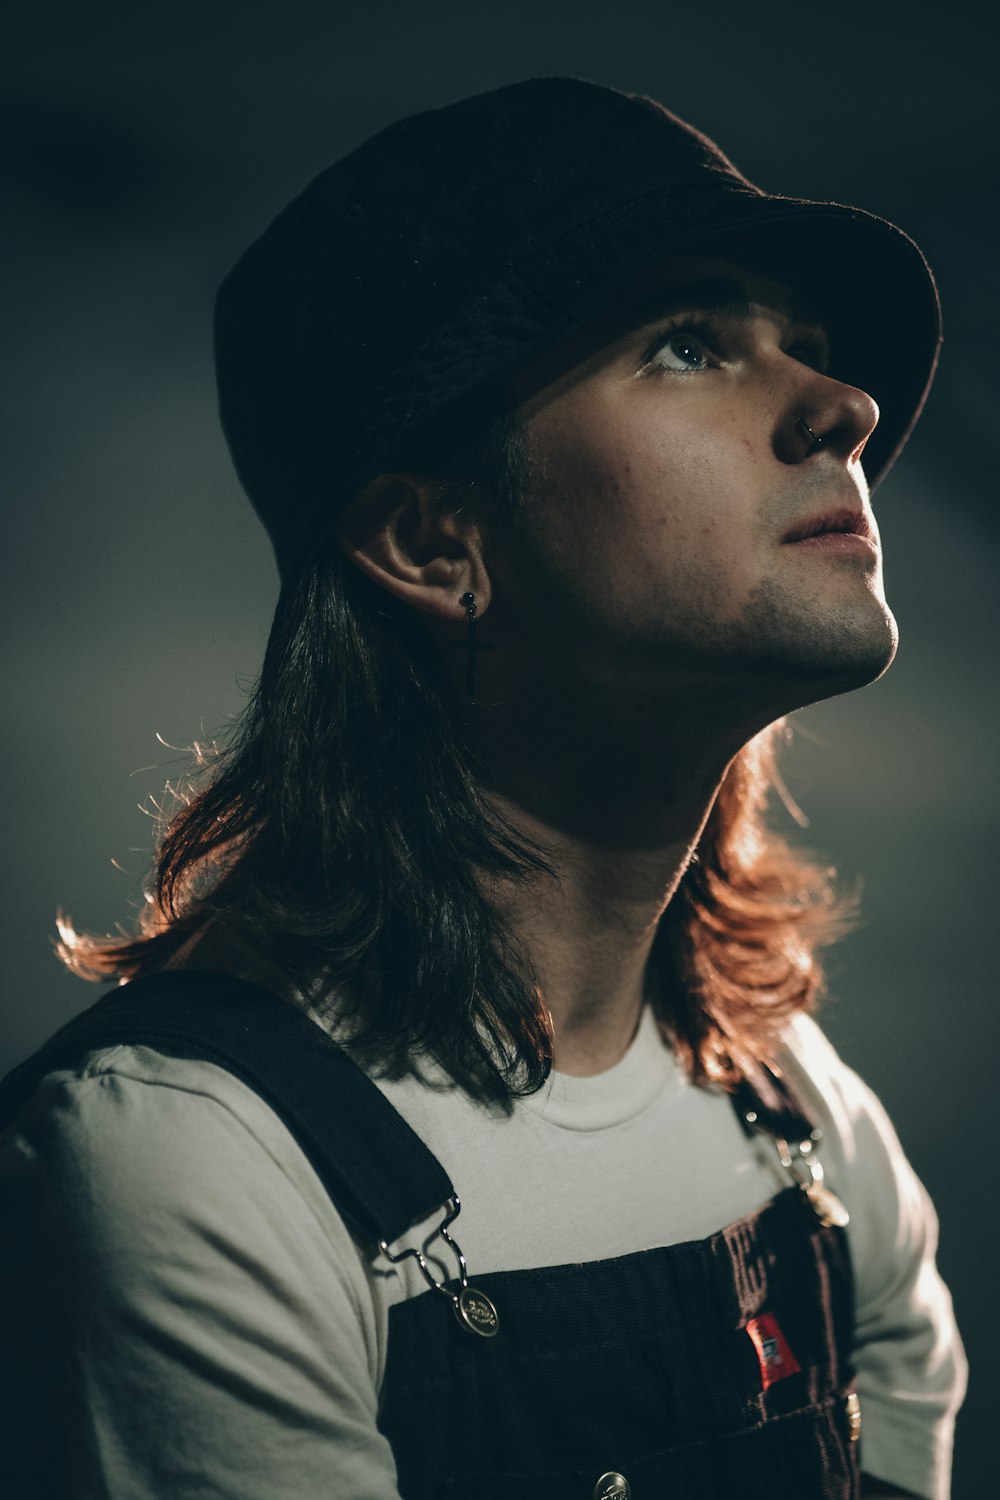 a person with long hair and a hat